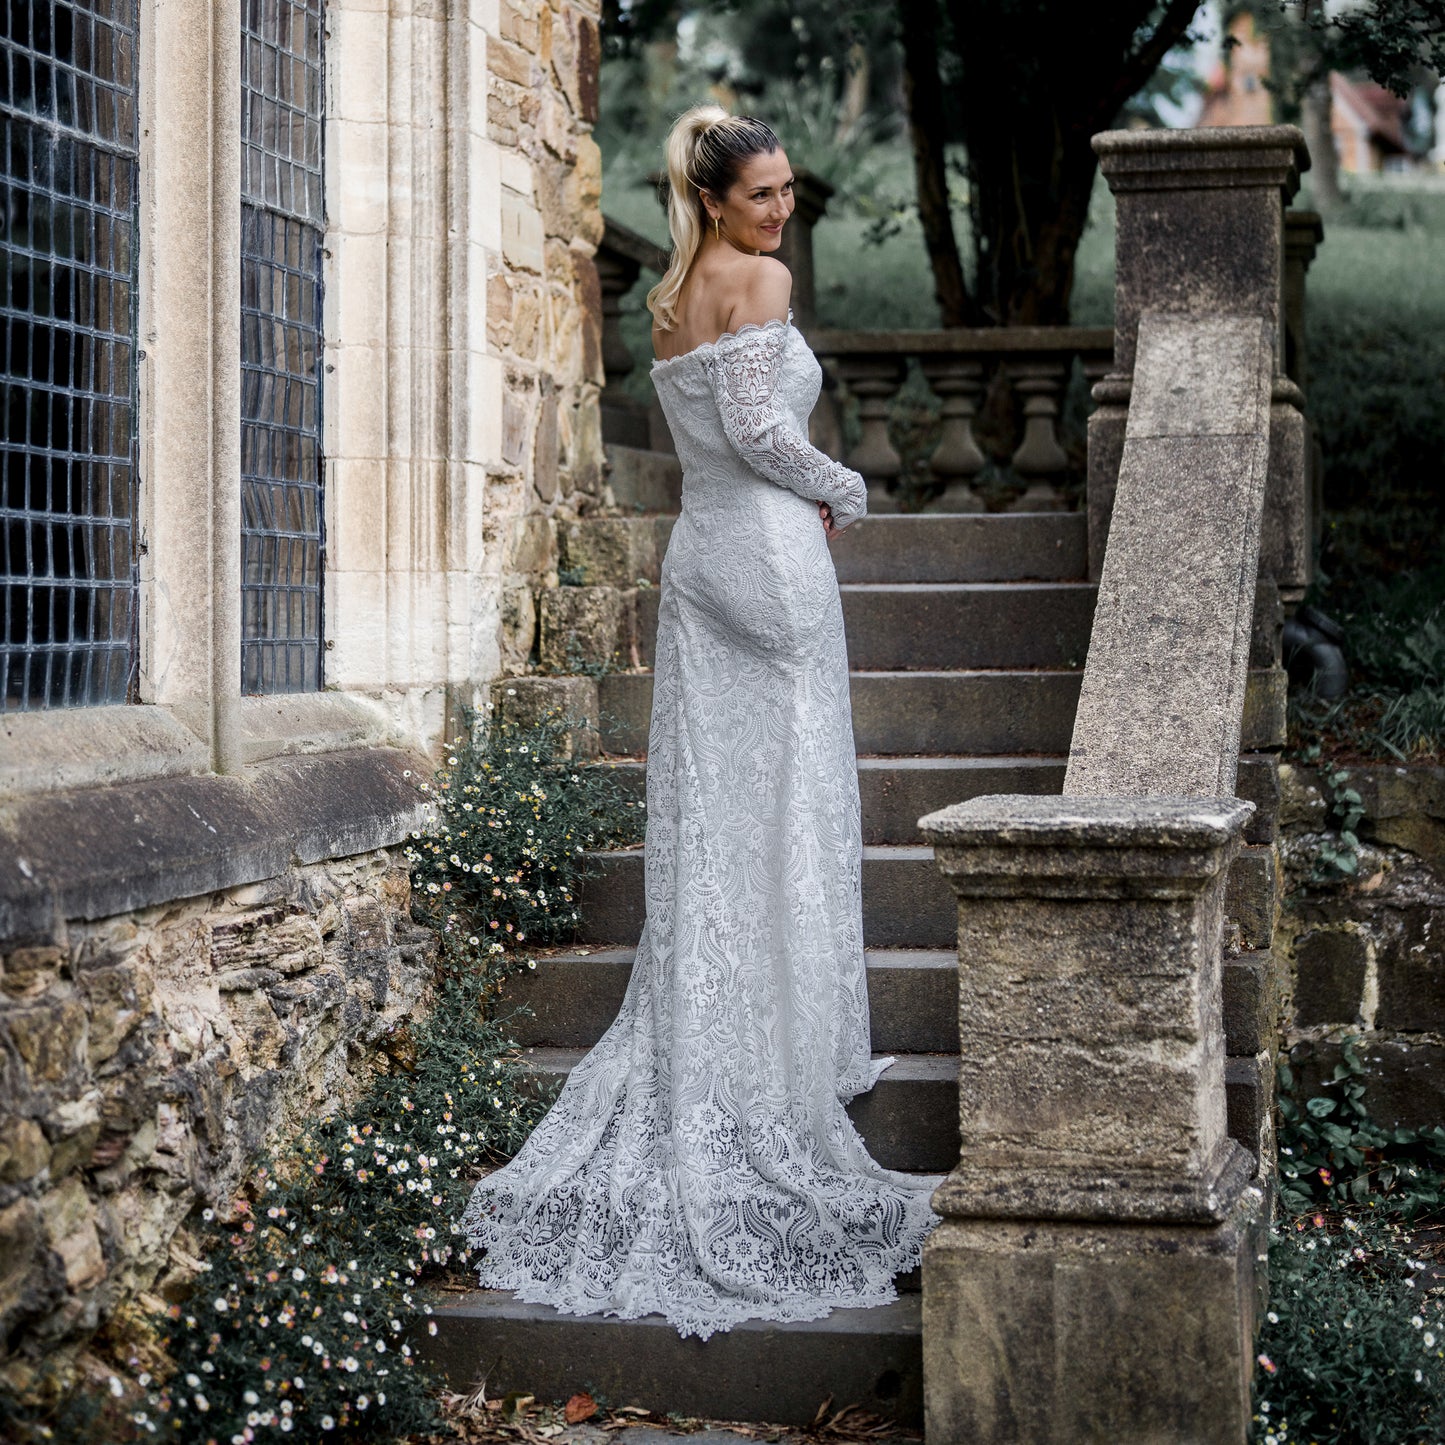 Stunning bride in the Celaya wedding dress featuring off-the-shoulder sleeves, scalloped trim, and a gracefully trailing chapel train.